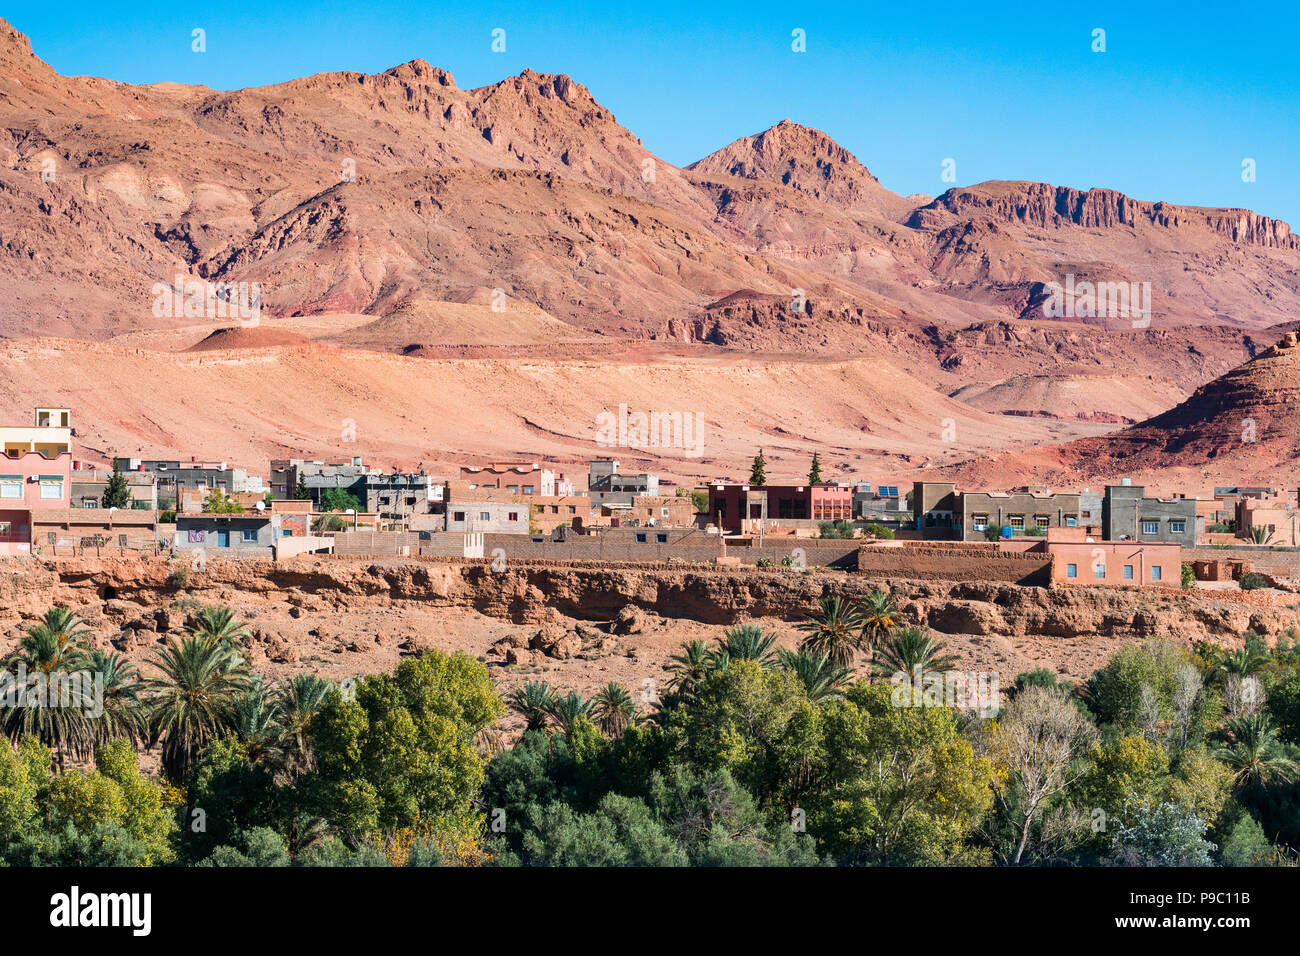 Landscape view of Atlas mountains and oasis around Douar Ait Boujane village in Todra gorge in Tinghir, Morocco Stock Photo